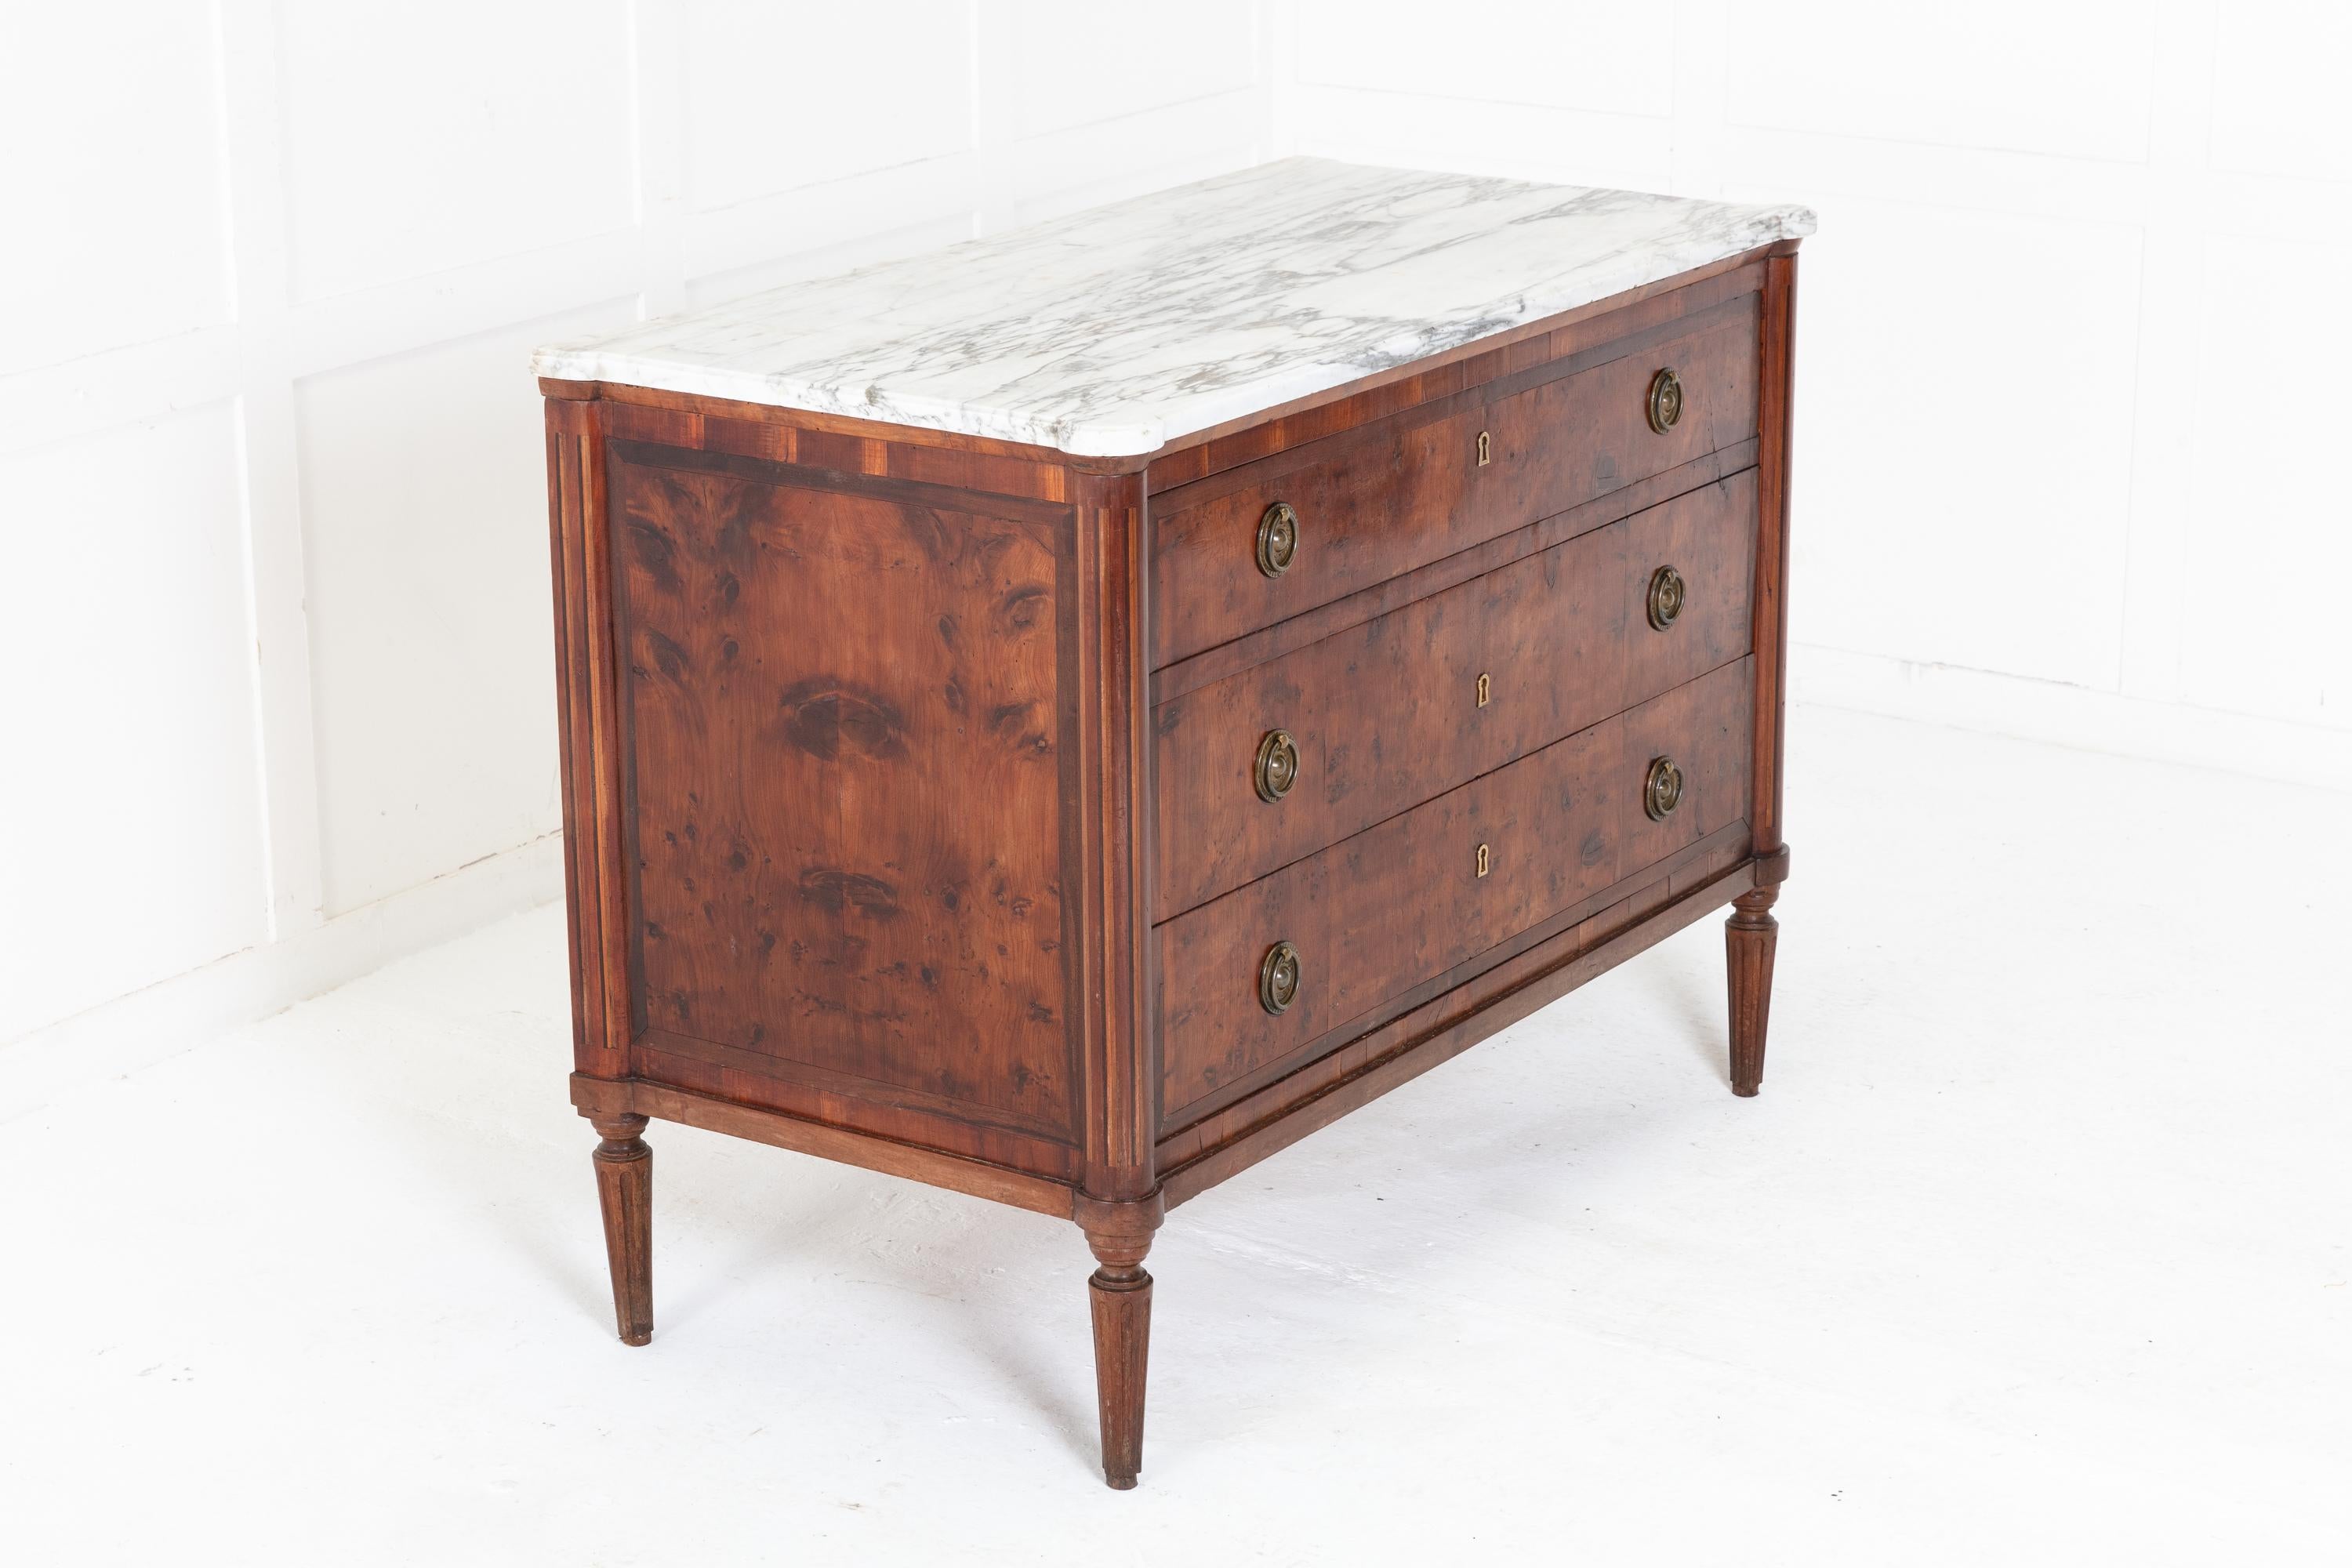 An unusual, early 19th Century yew, secretaire commode. Having a white and grey marble top above the secretaire drawer. The front of the top drawer is lowered by a latch mechanism and opens to reveal a compartment, small drawers and a writing